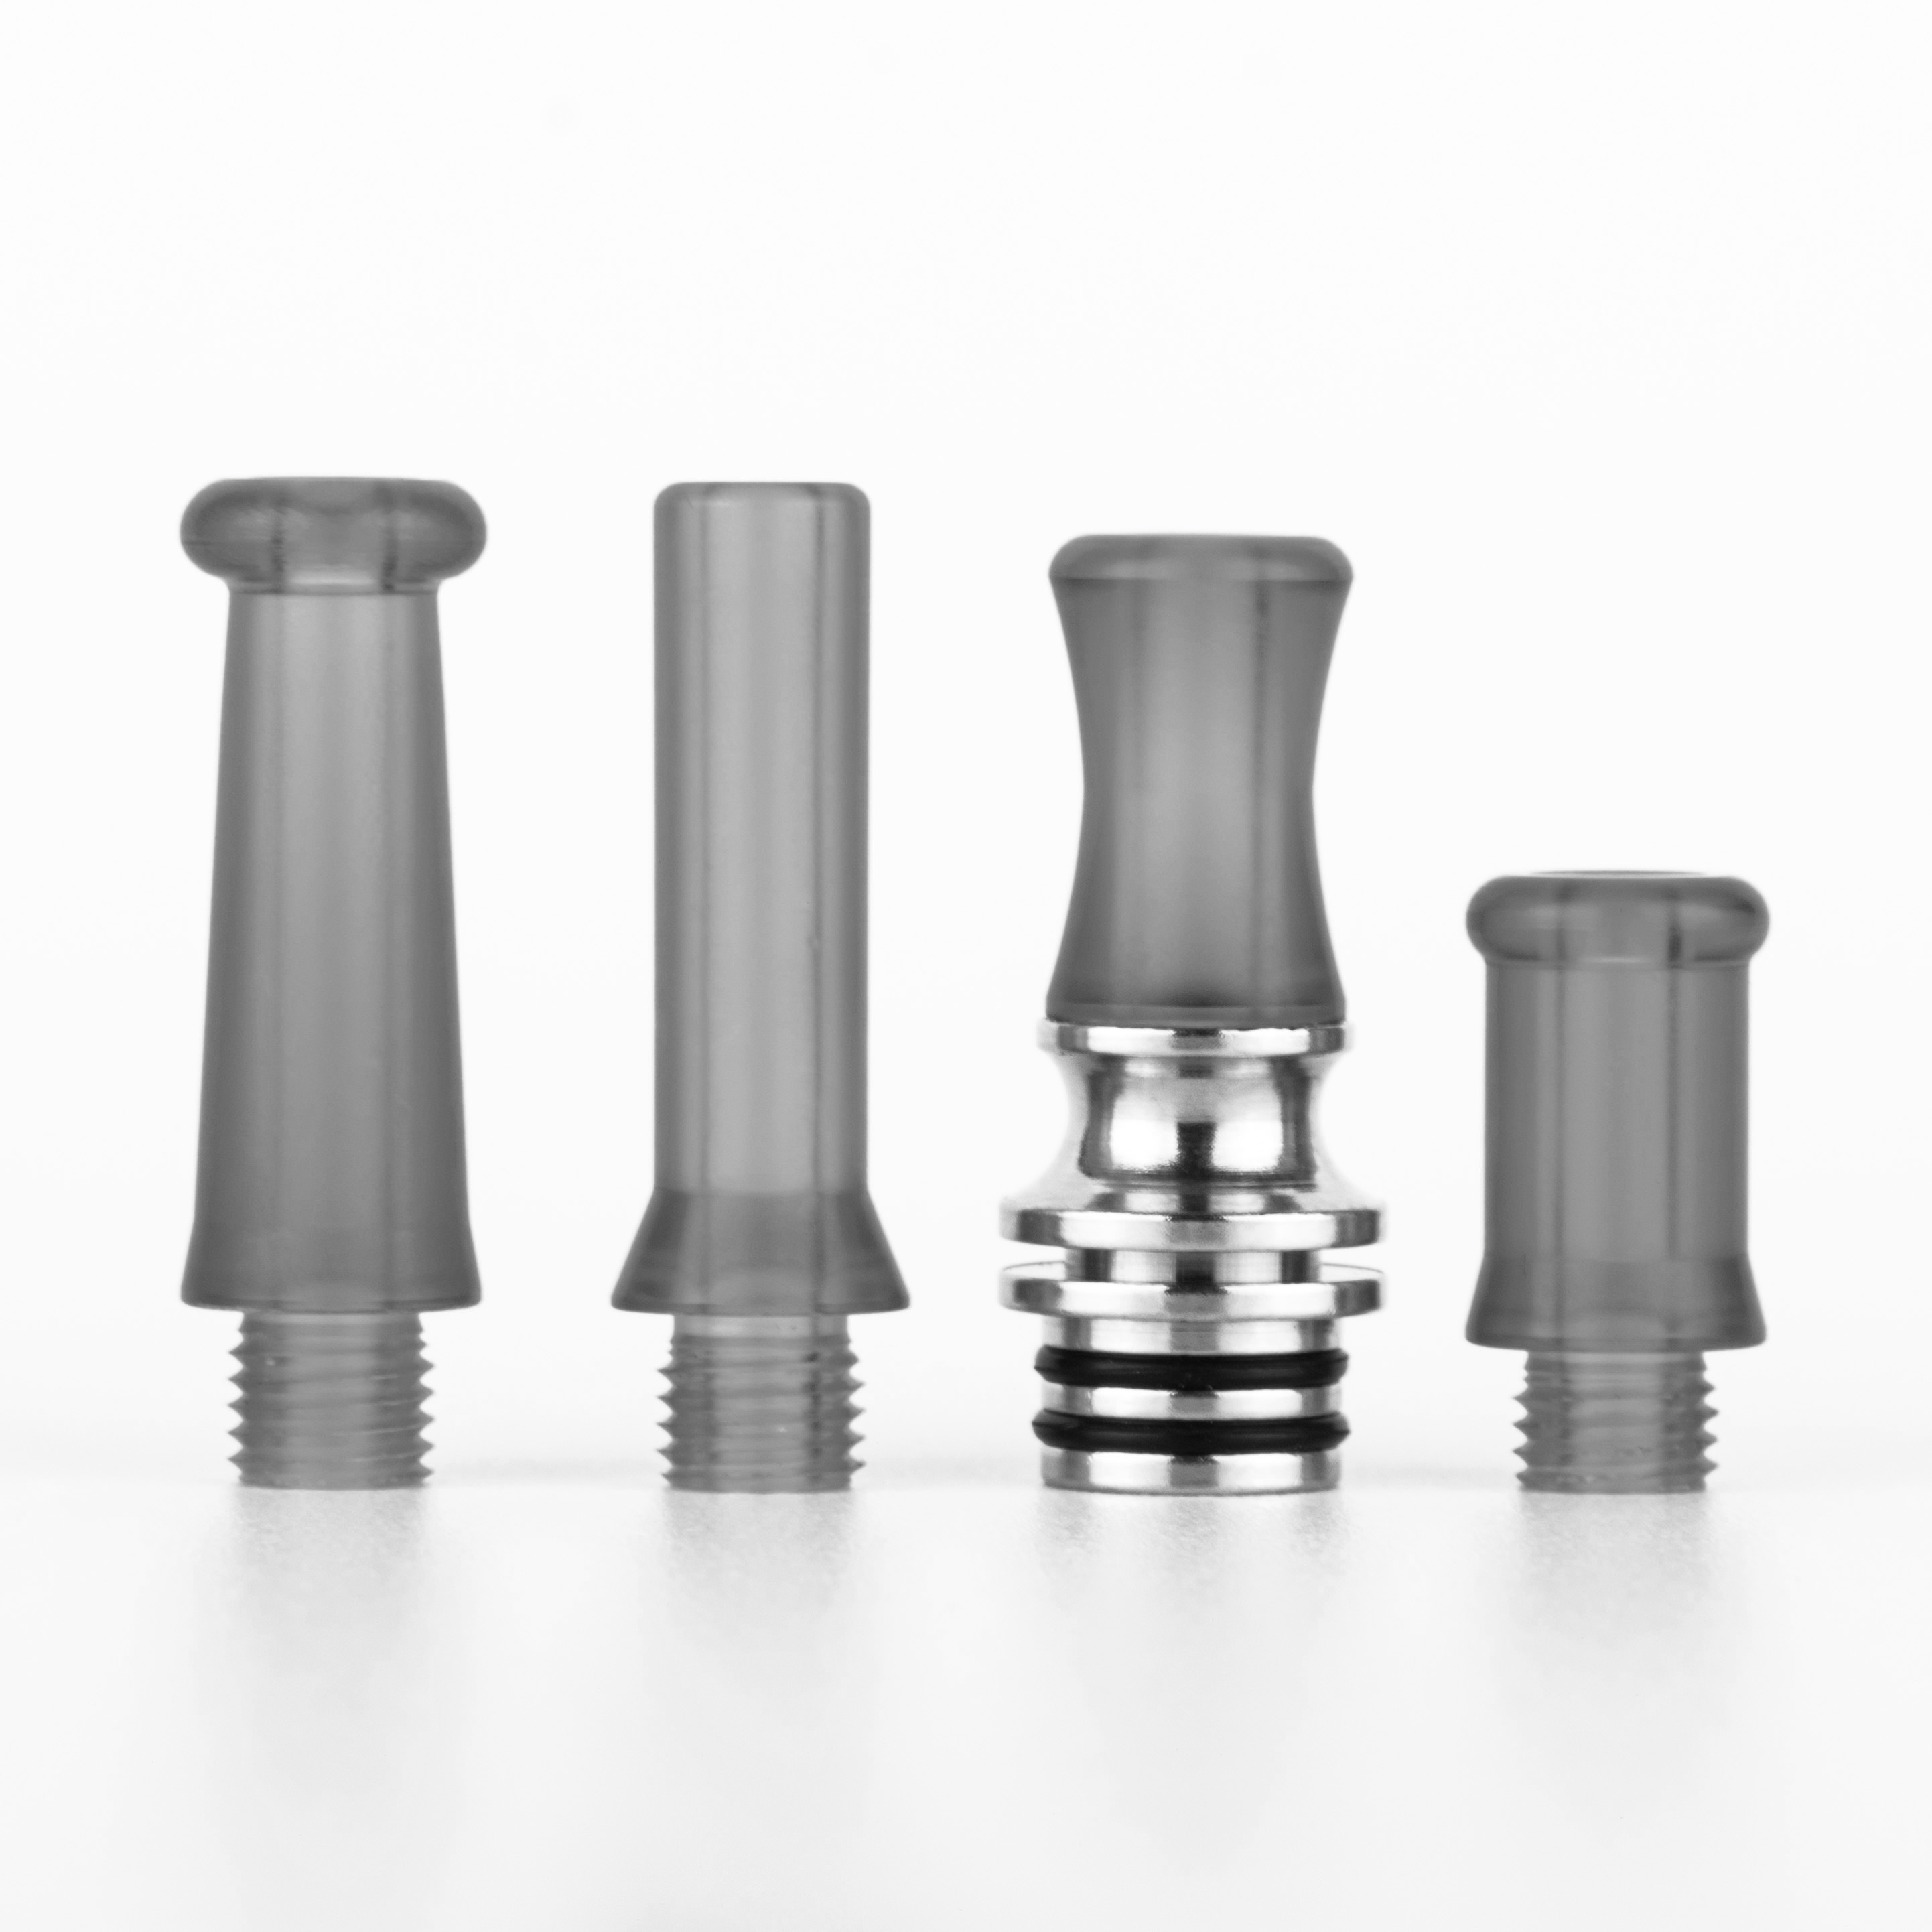 Sailing hot sale 4 in 1 drip tip stainless steel and epoxy resin drip tip